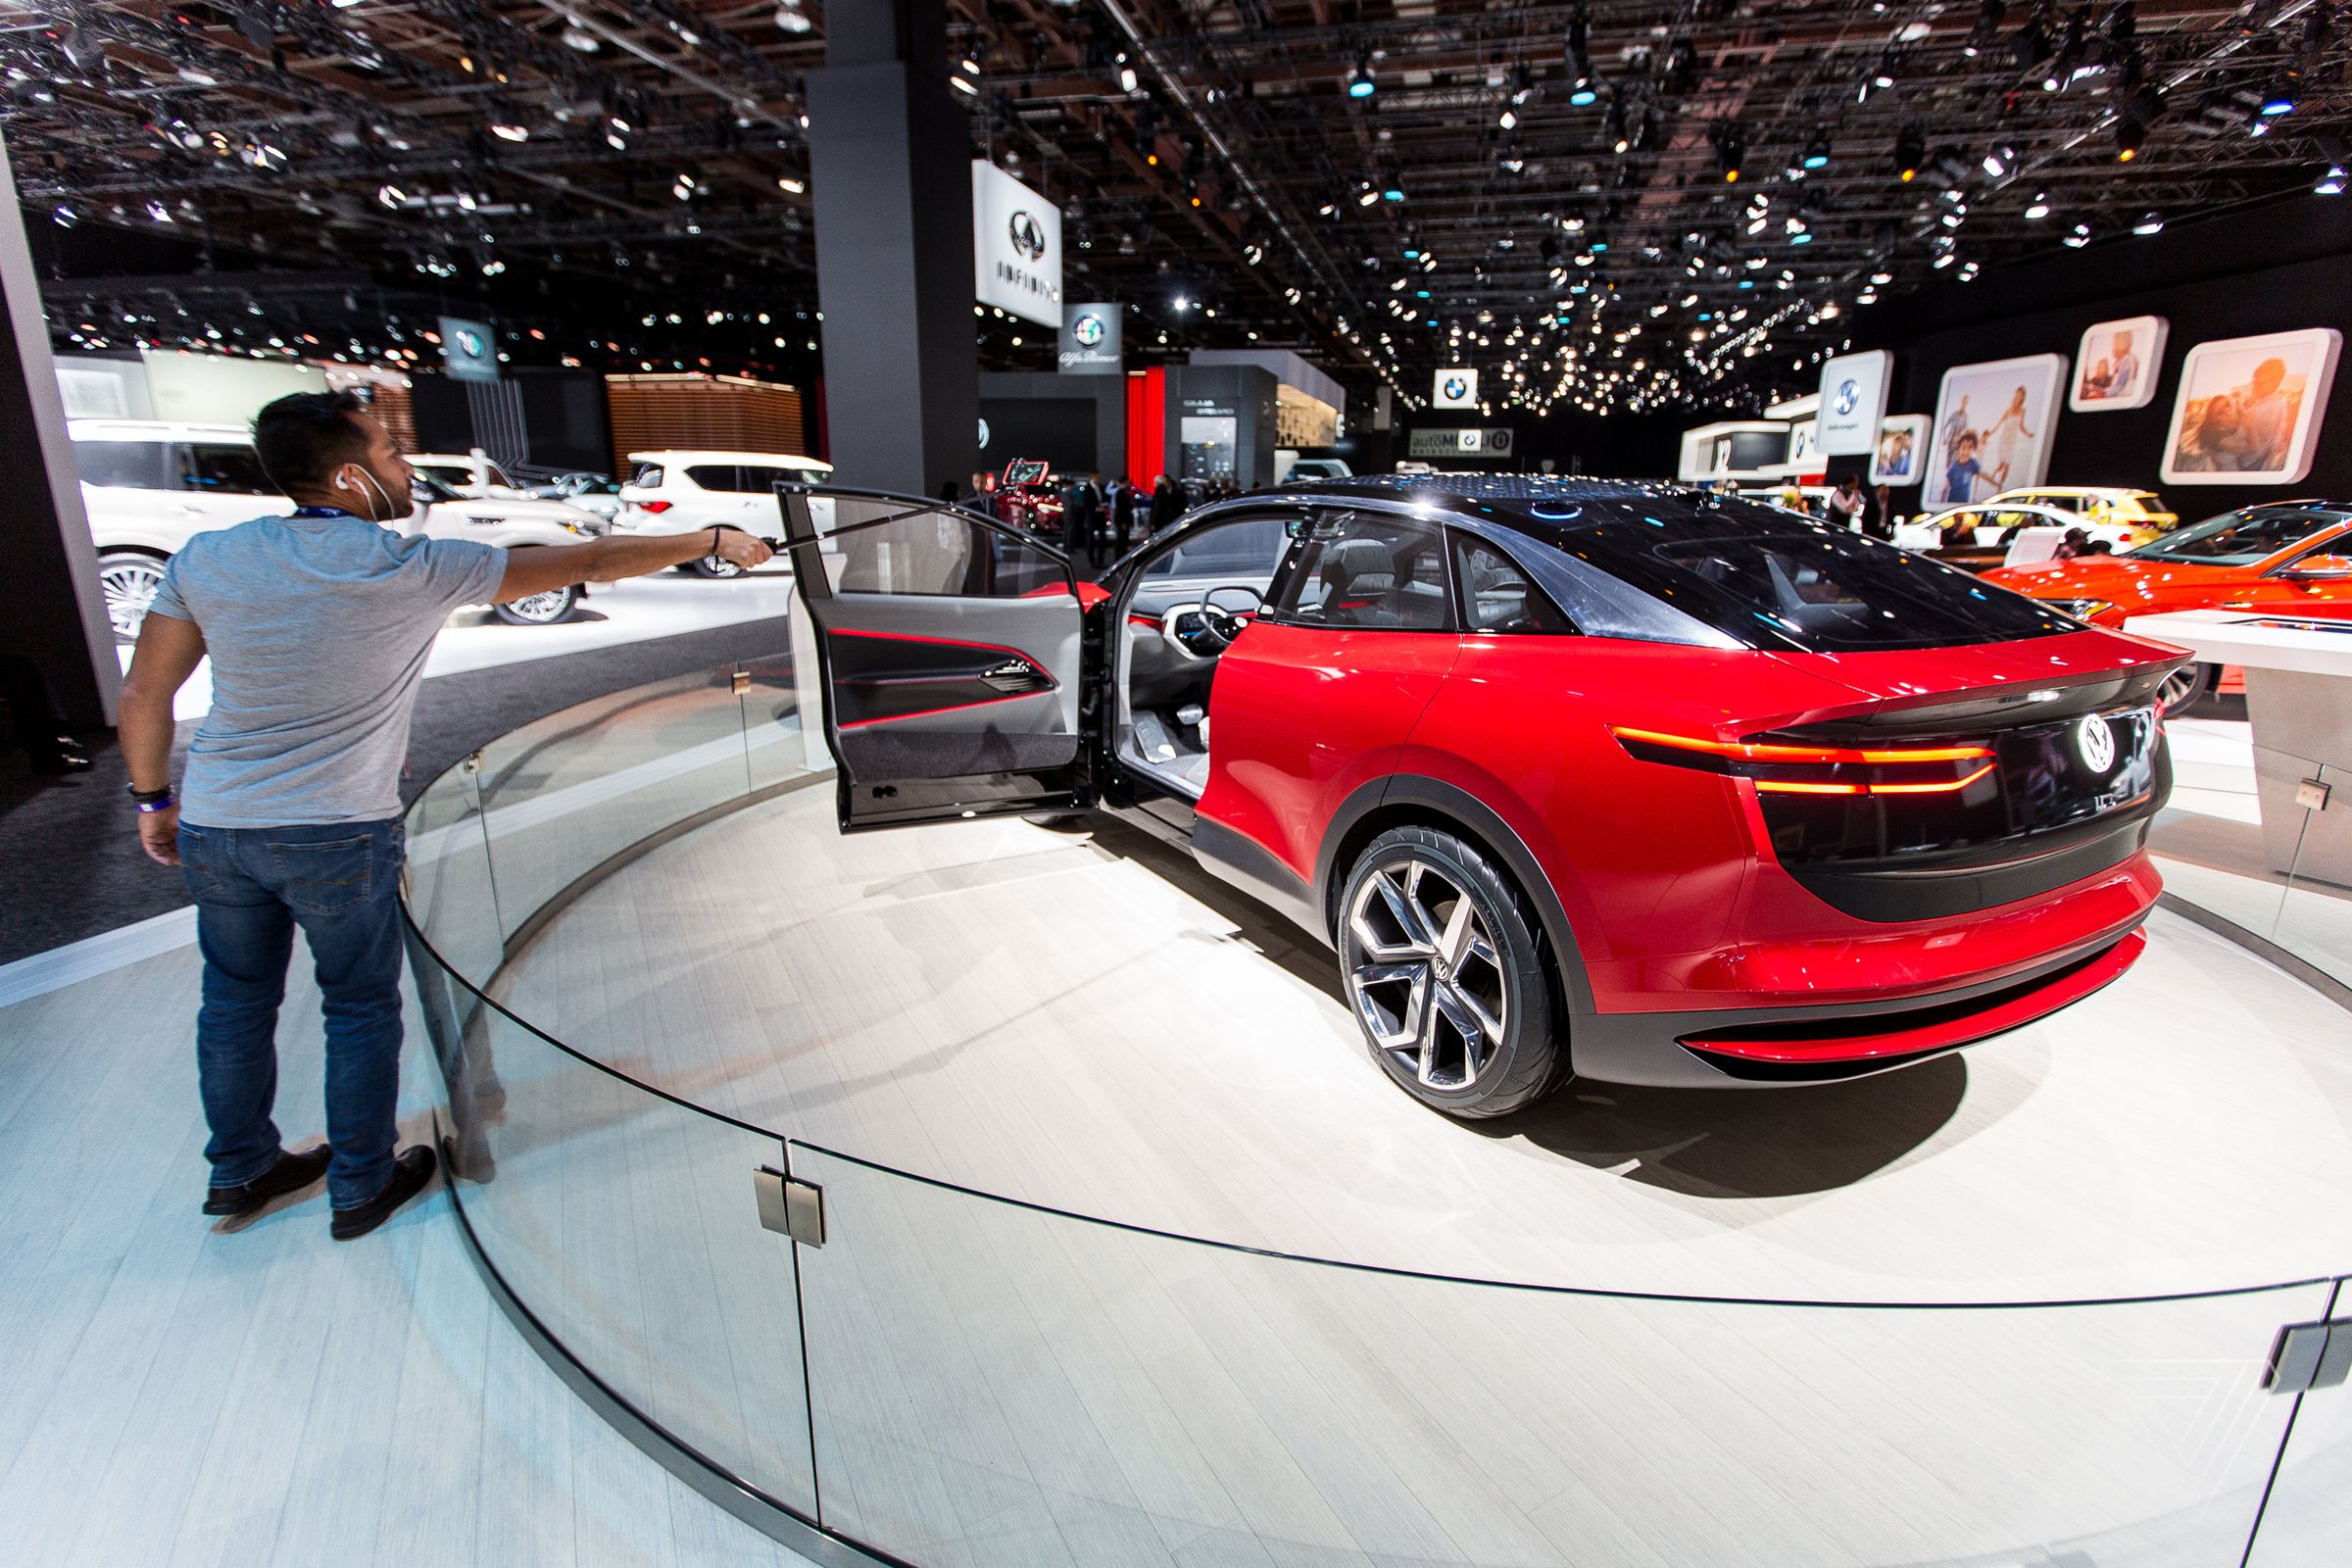 Many of the concept cars on display at the auto show were cordoned off, like Volkswagen’s I.D. Crozz electric SUV.